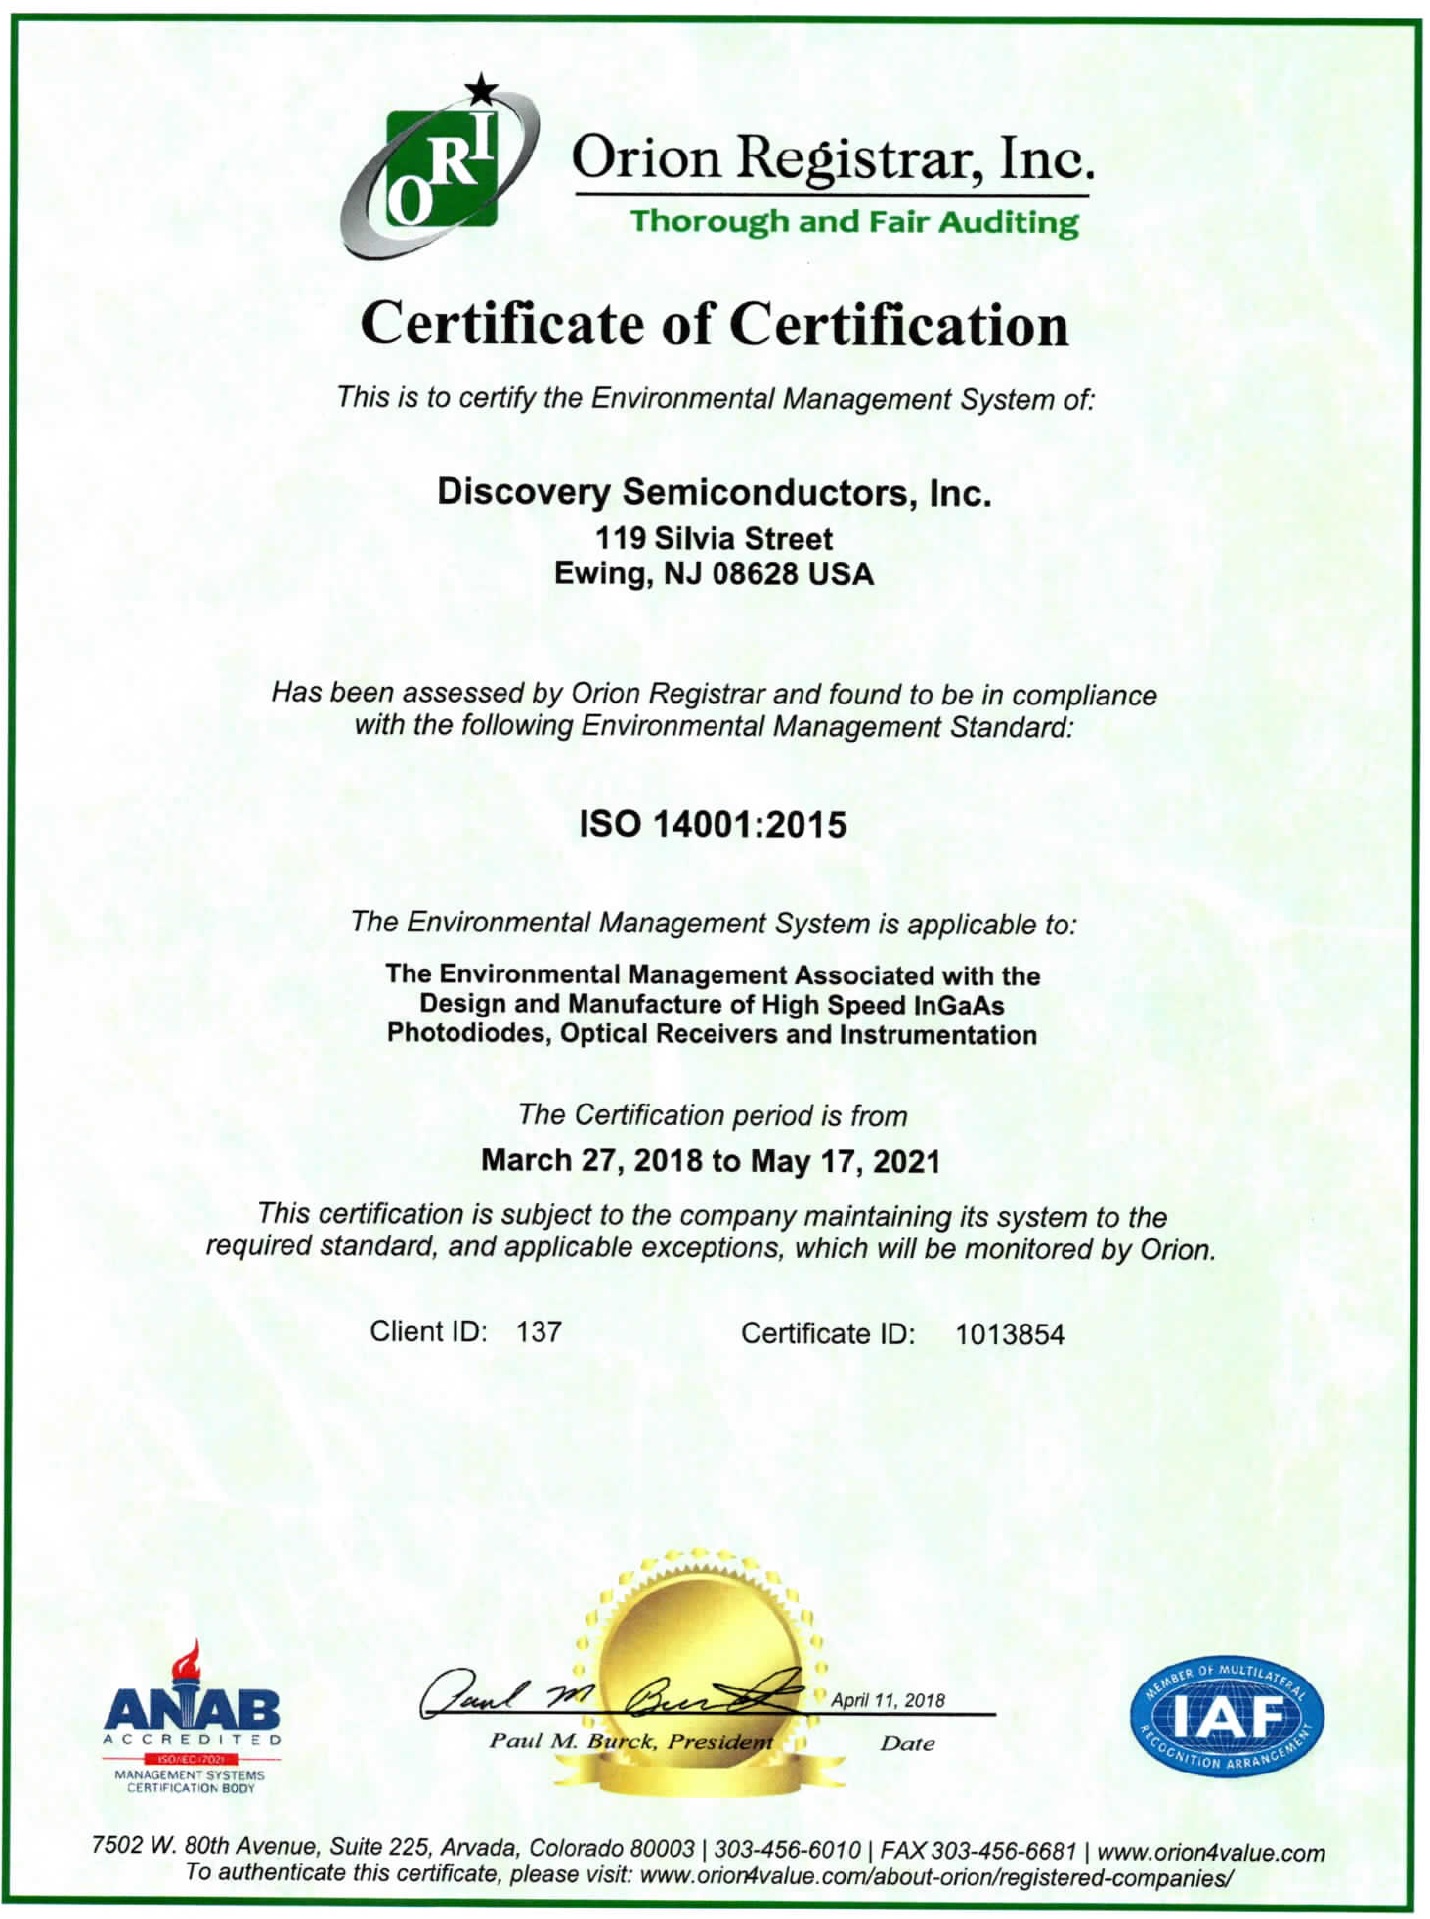 Discovery Semiconductors is an ISO 14001:2015 Certified Company